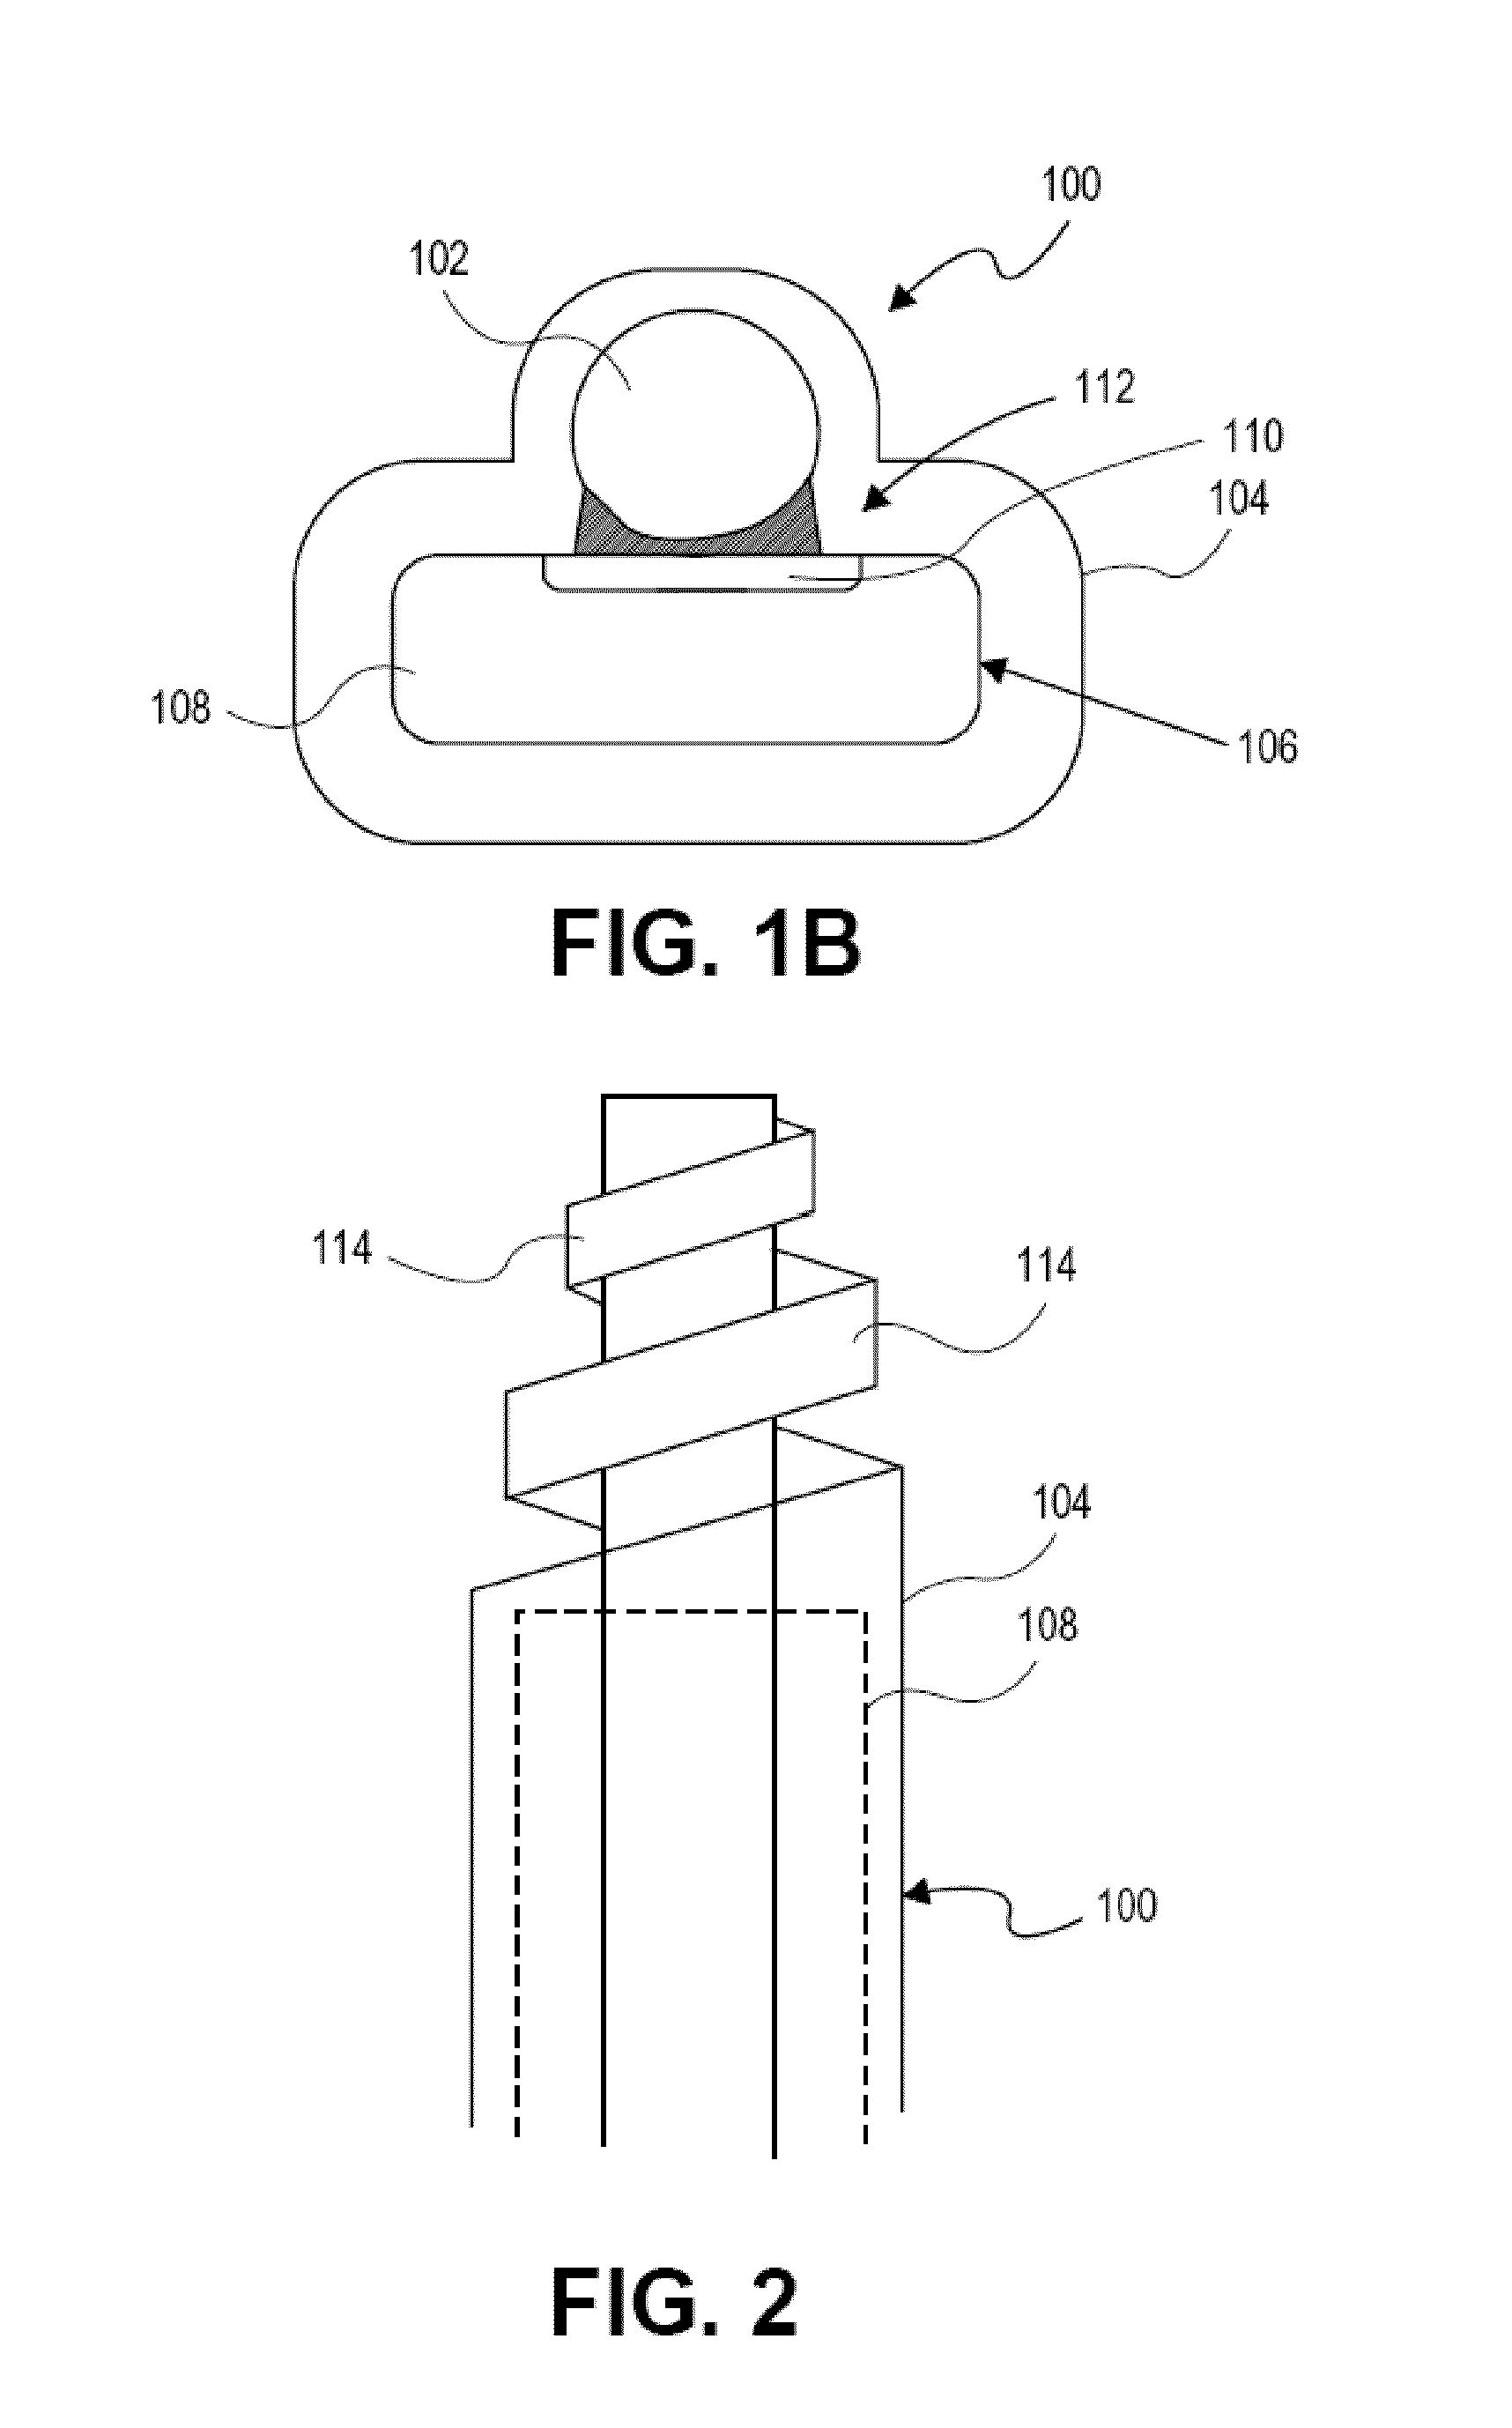 Nerve cuff with pocket for leadless stimulator